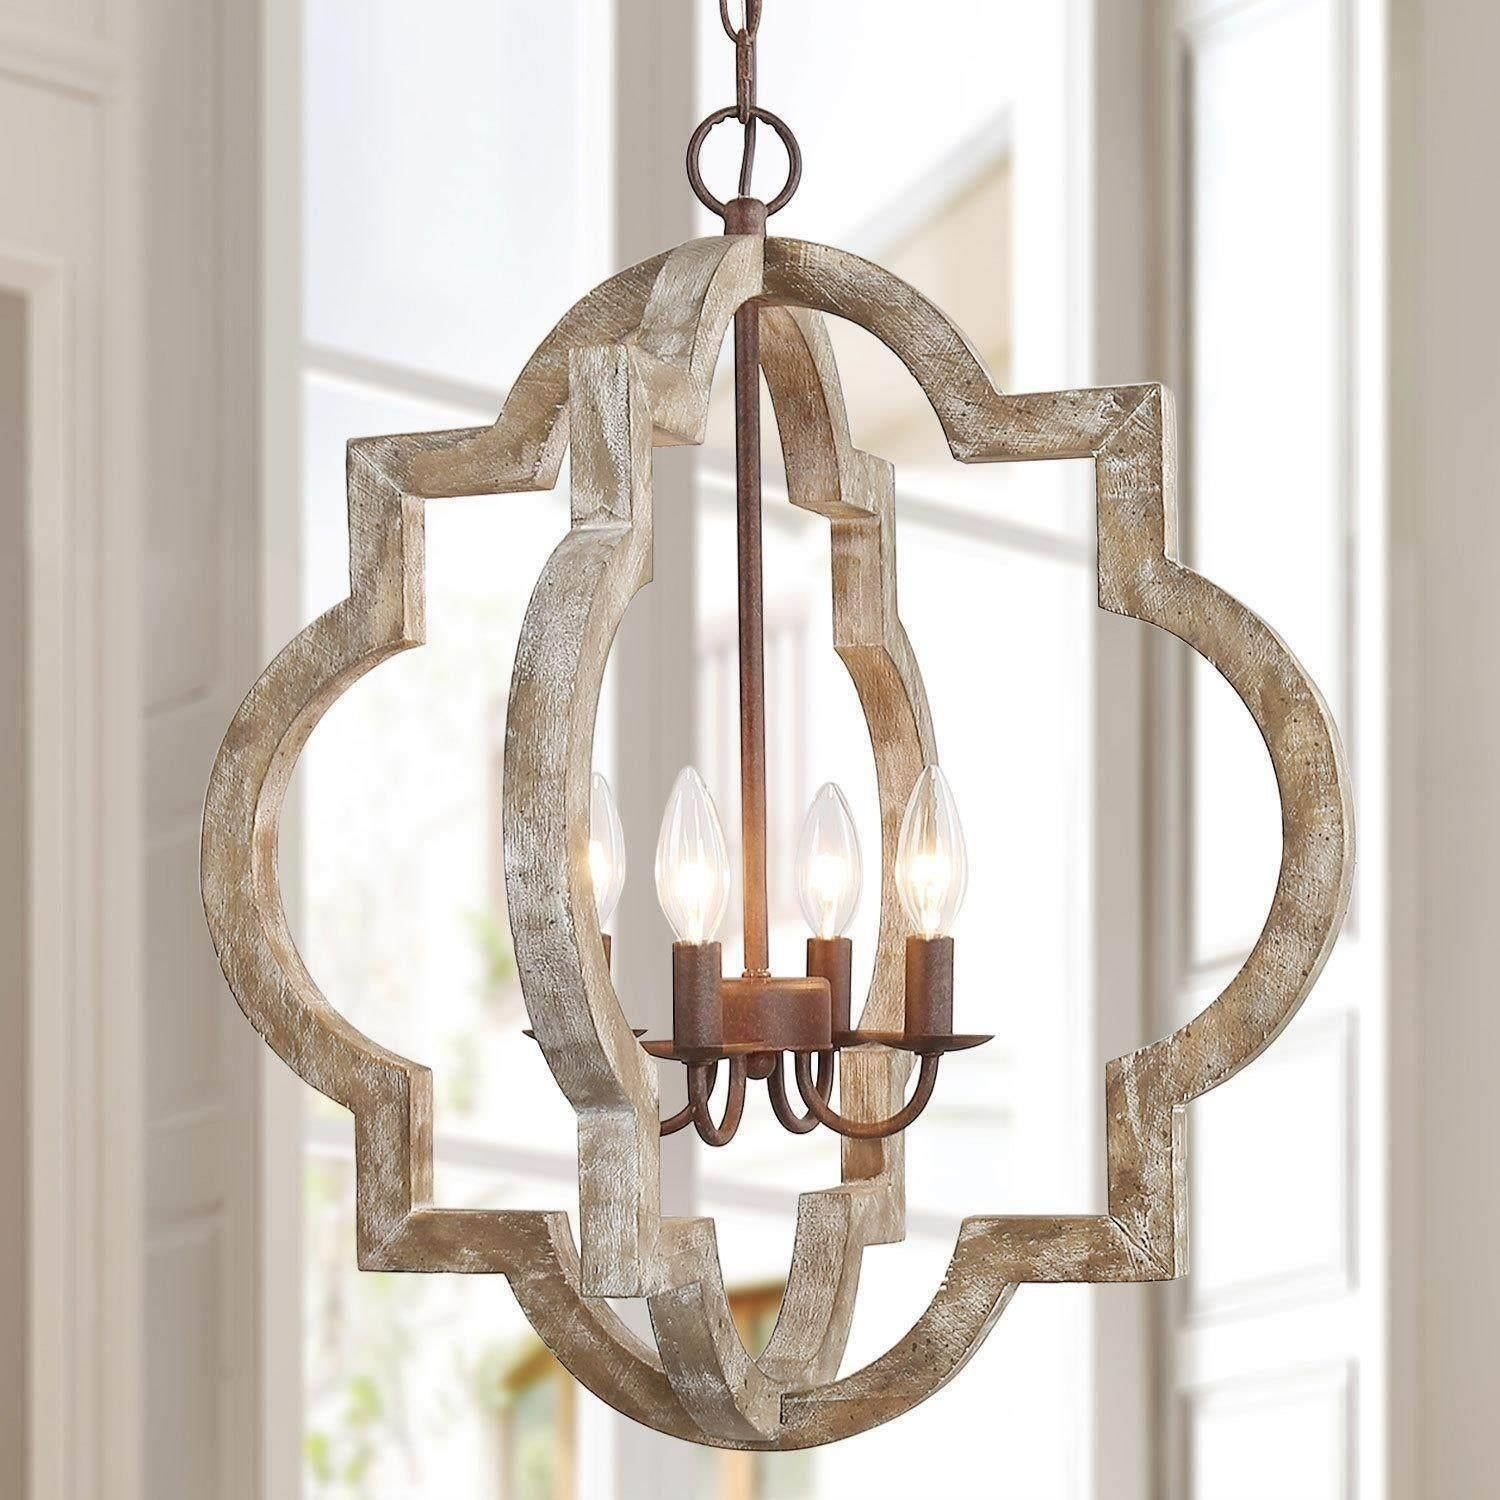 The Gray Barn Farmhouse Rustic 4 Light Distressed Wood Modern Lantern  Chandelier For Living Room – On Sale – Overstock – 29204959 With Rustic Gray Lantern Chandeliers (View 8 of 15)